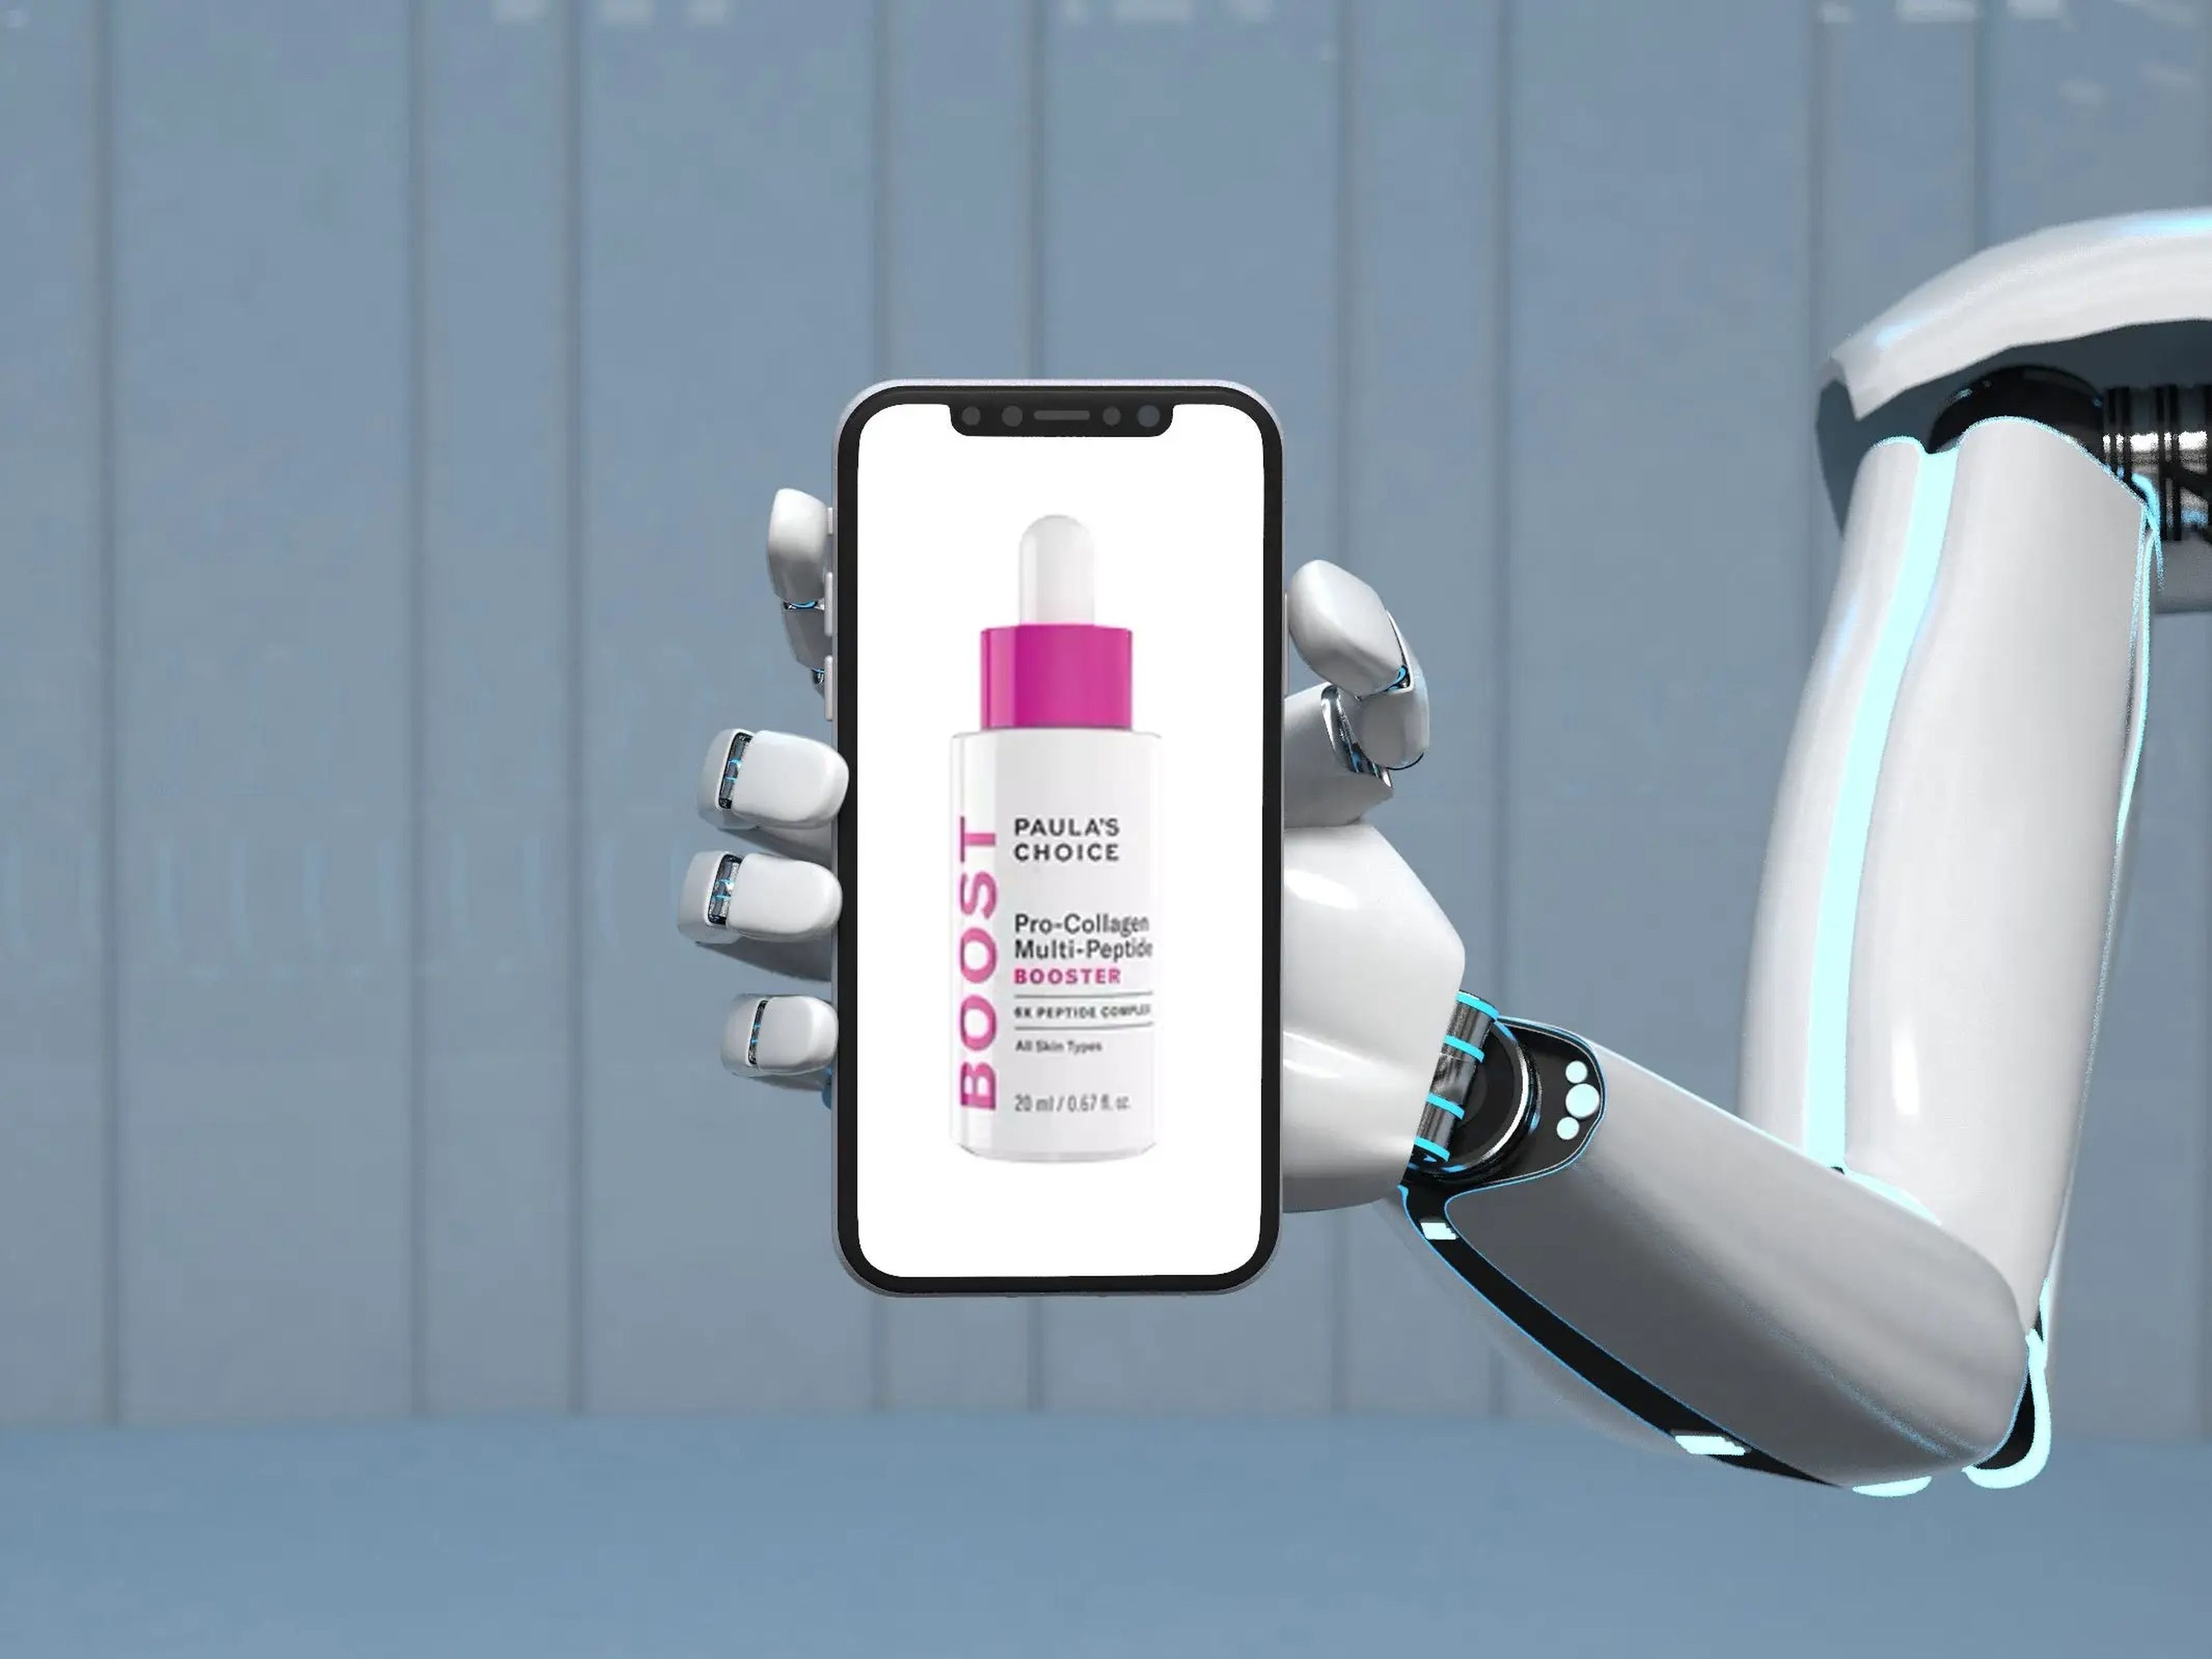 A 3D image of a robot holding a smartphone displaying an image of Paula's Choice peptide serum.